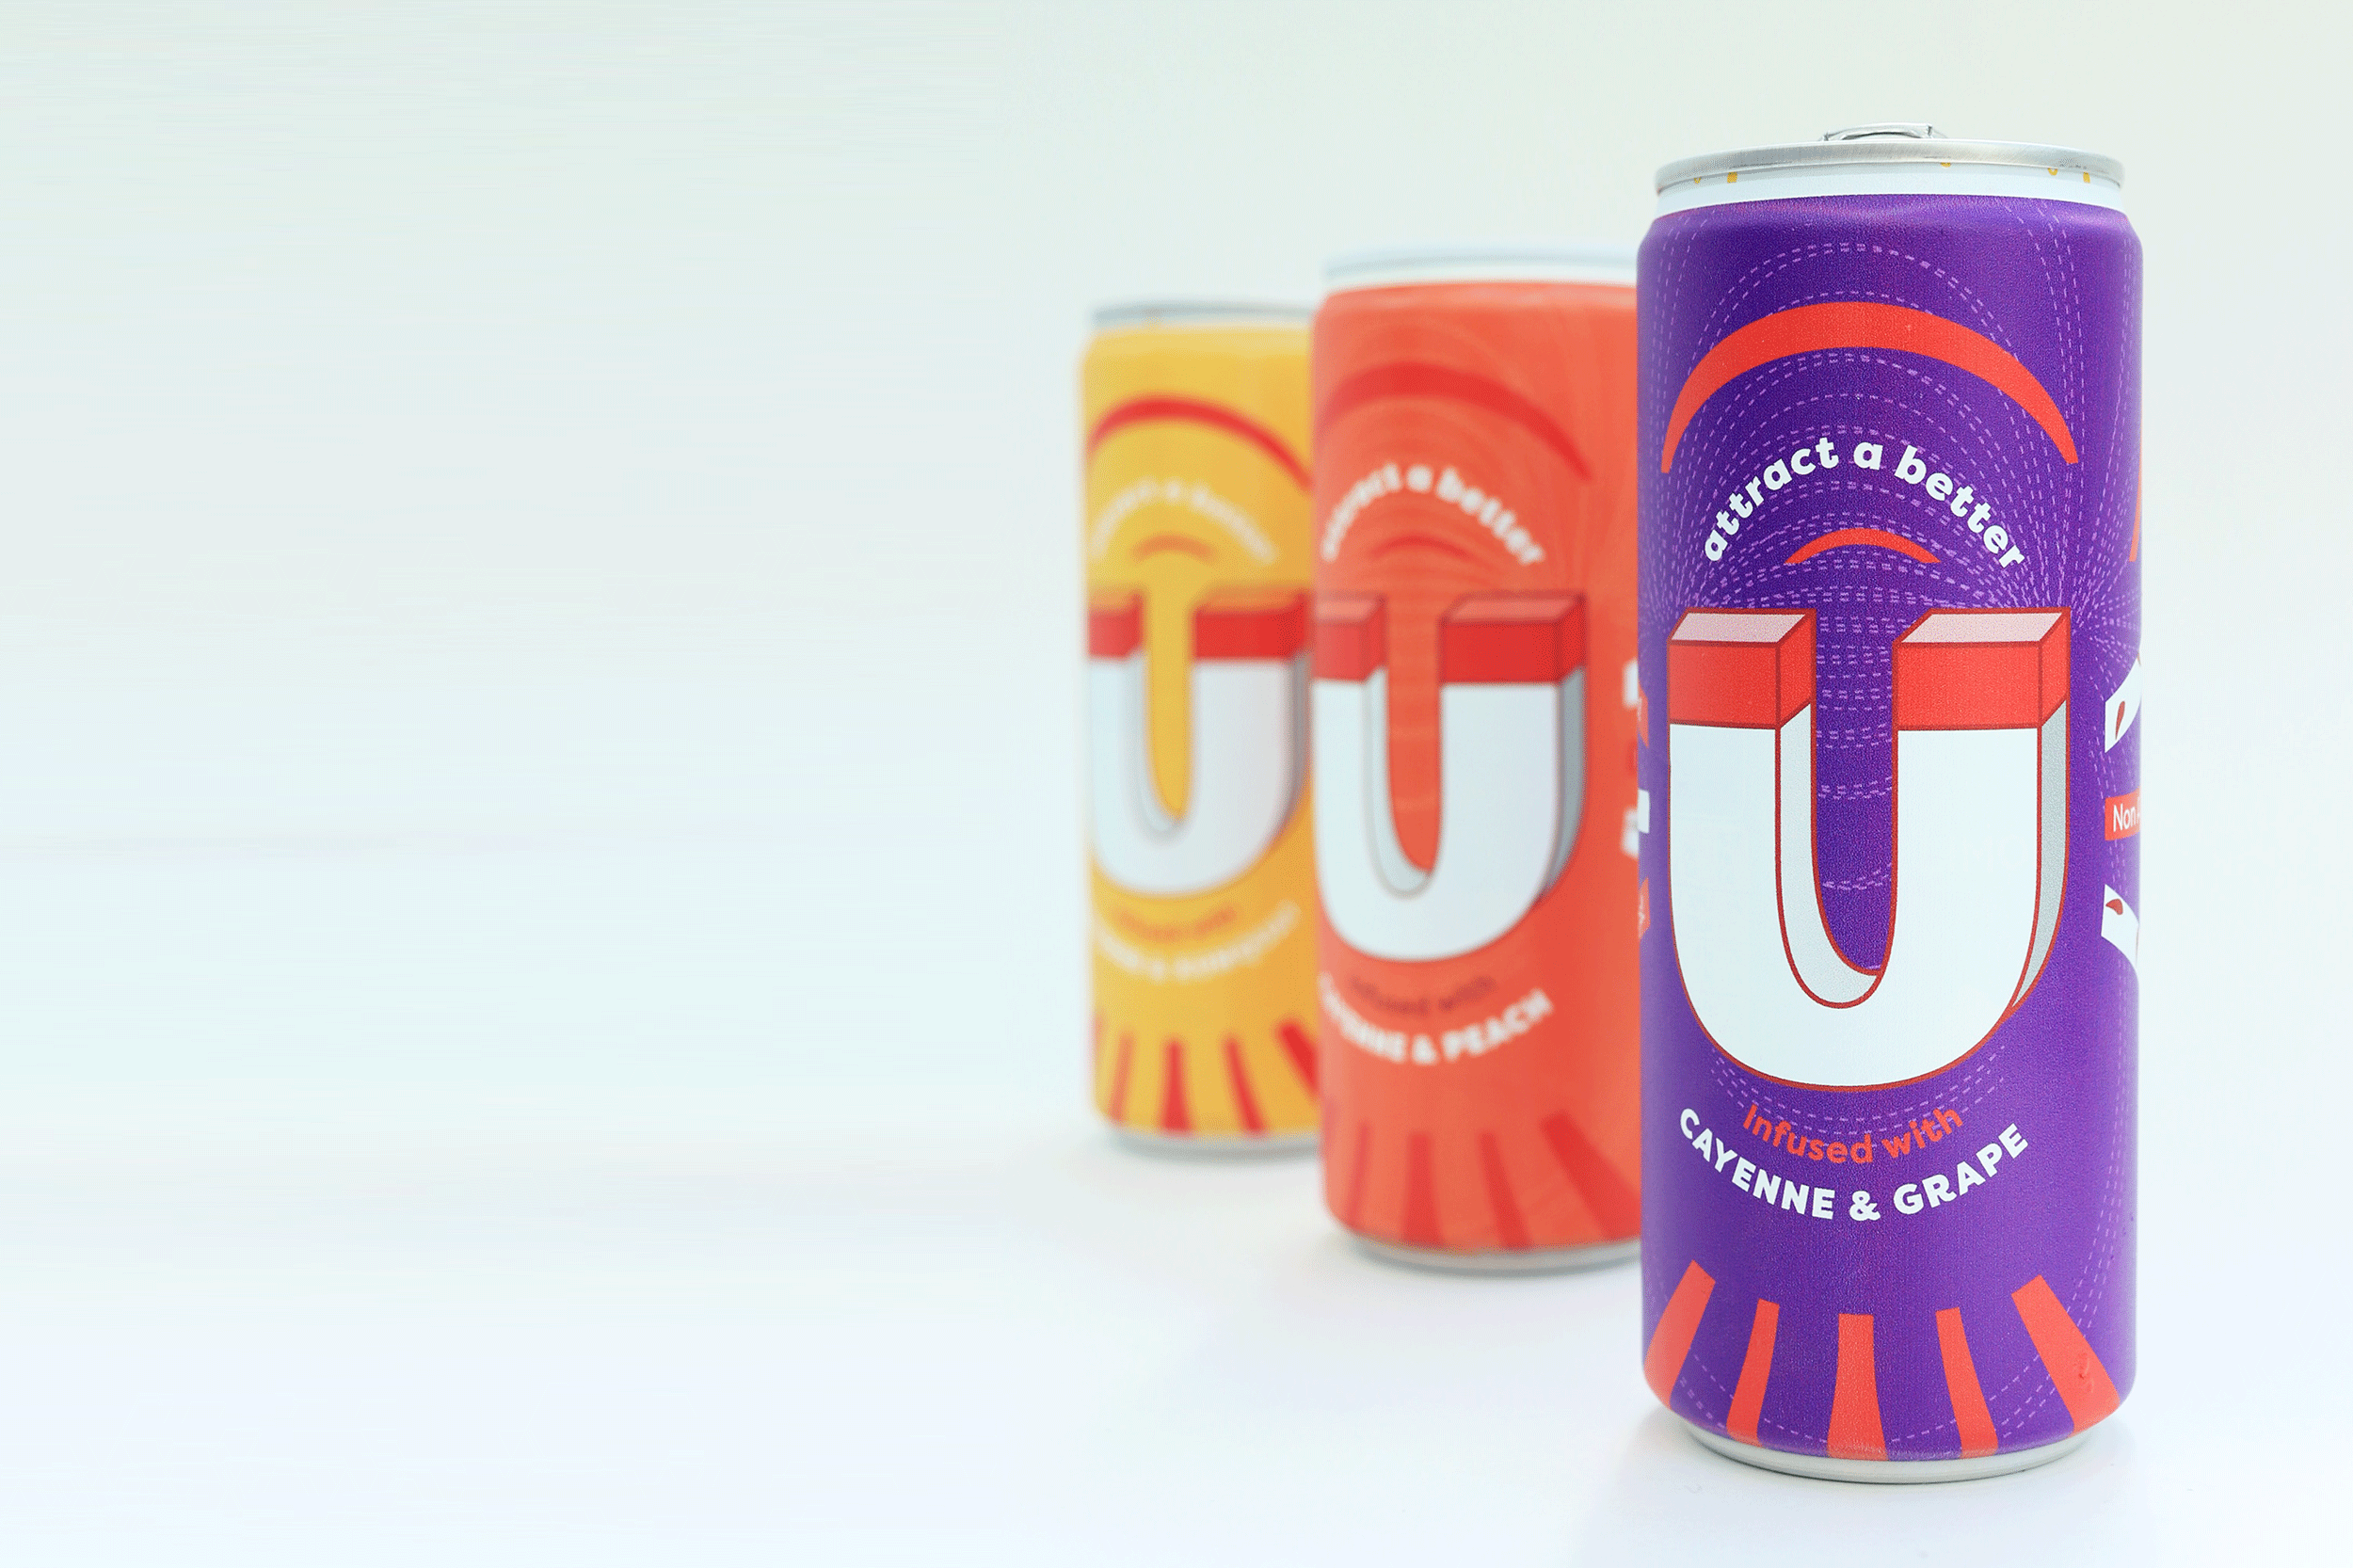 Graphic Design Packaging by Maika Elsley Medina showing 3 canned drinks of bright colour. With magnetic field lines and a U-shaped magnet to represent the attraction to health.